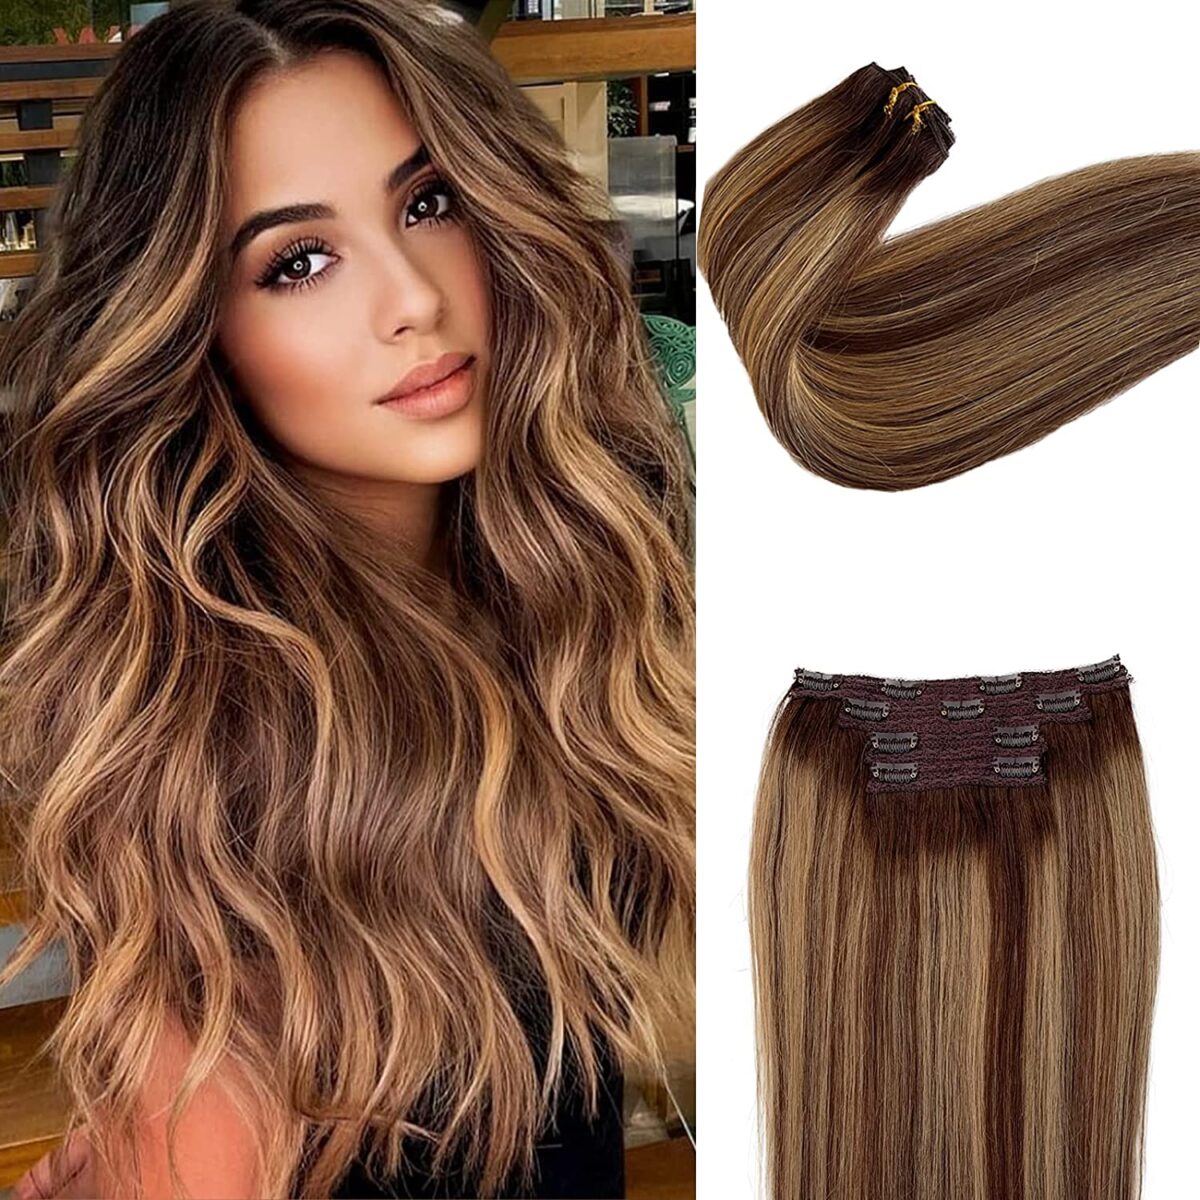 direct factory low costs! transform your look with our affordable dark brown luxe clip in hair extensions